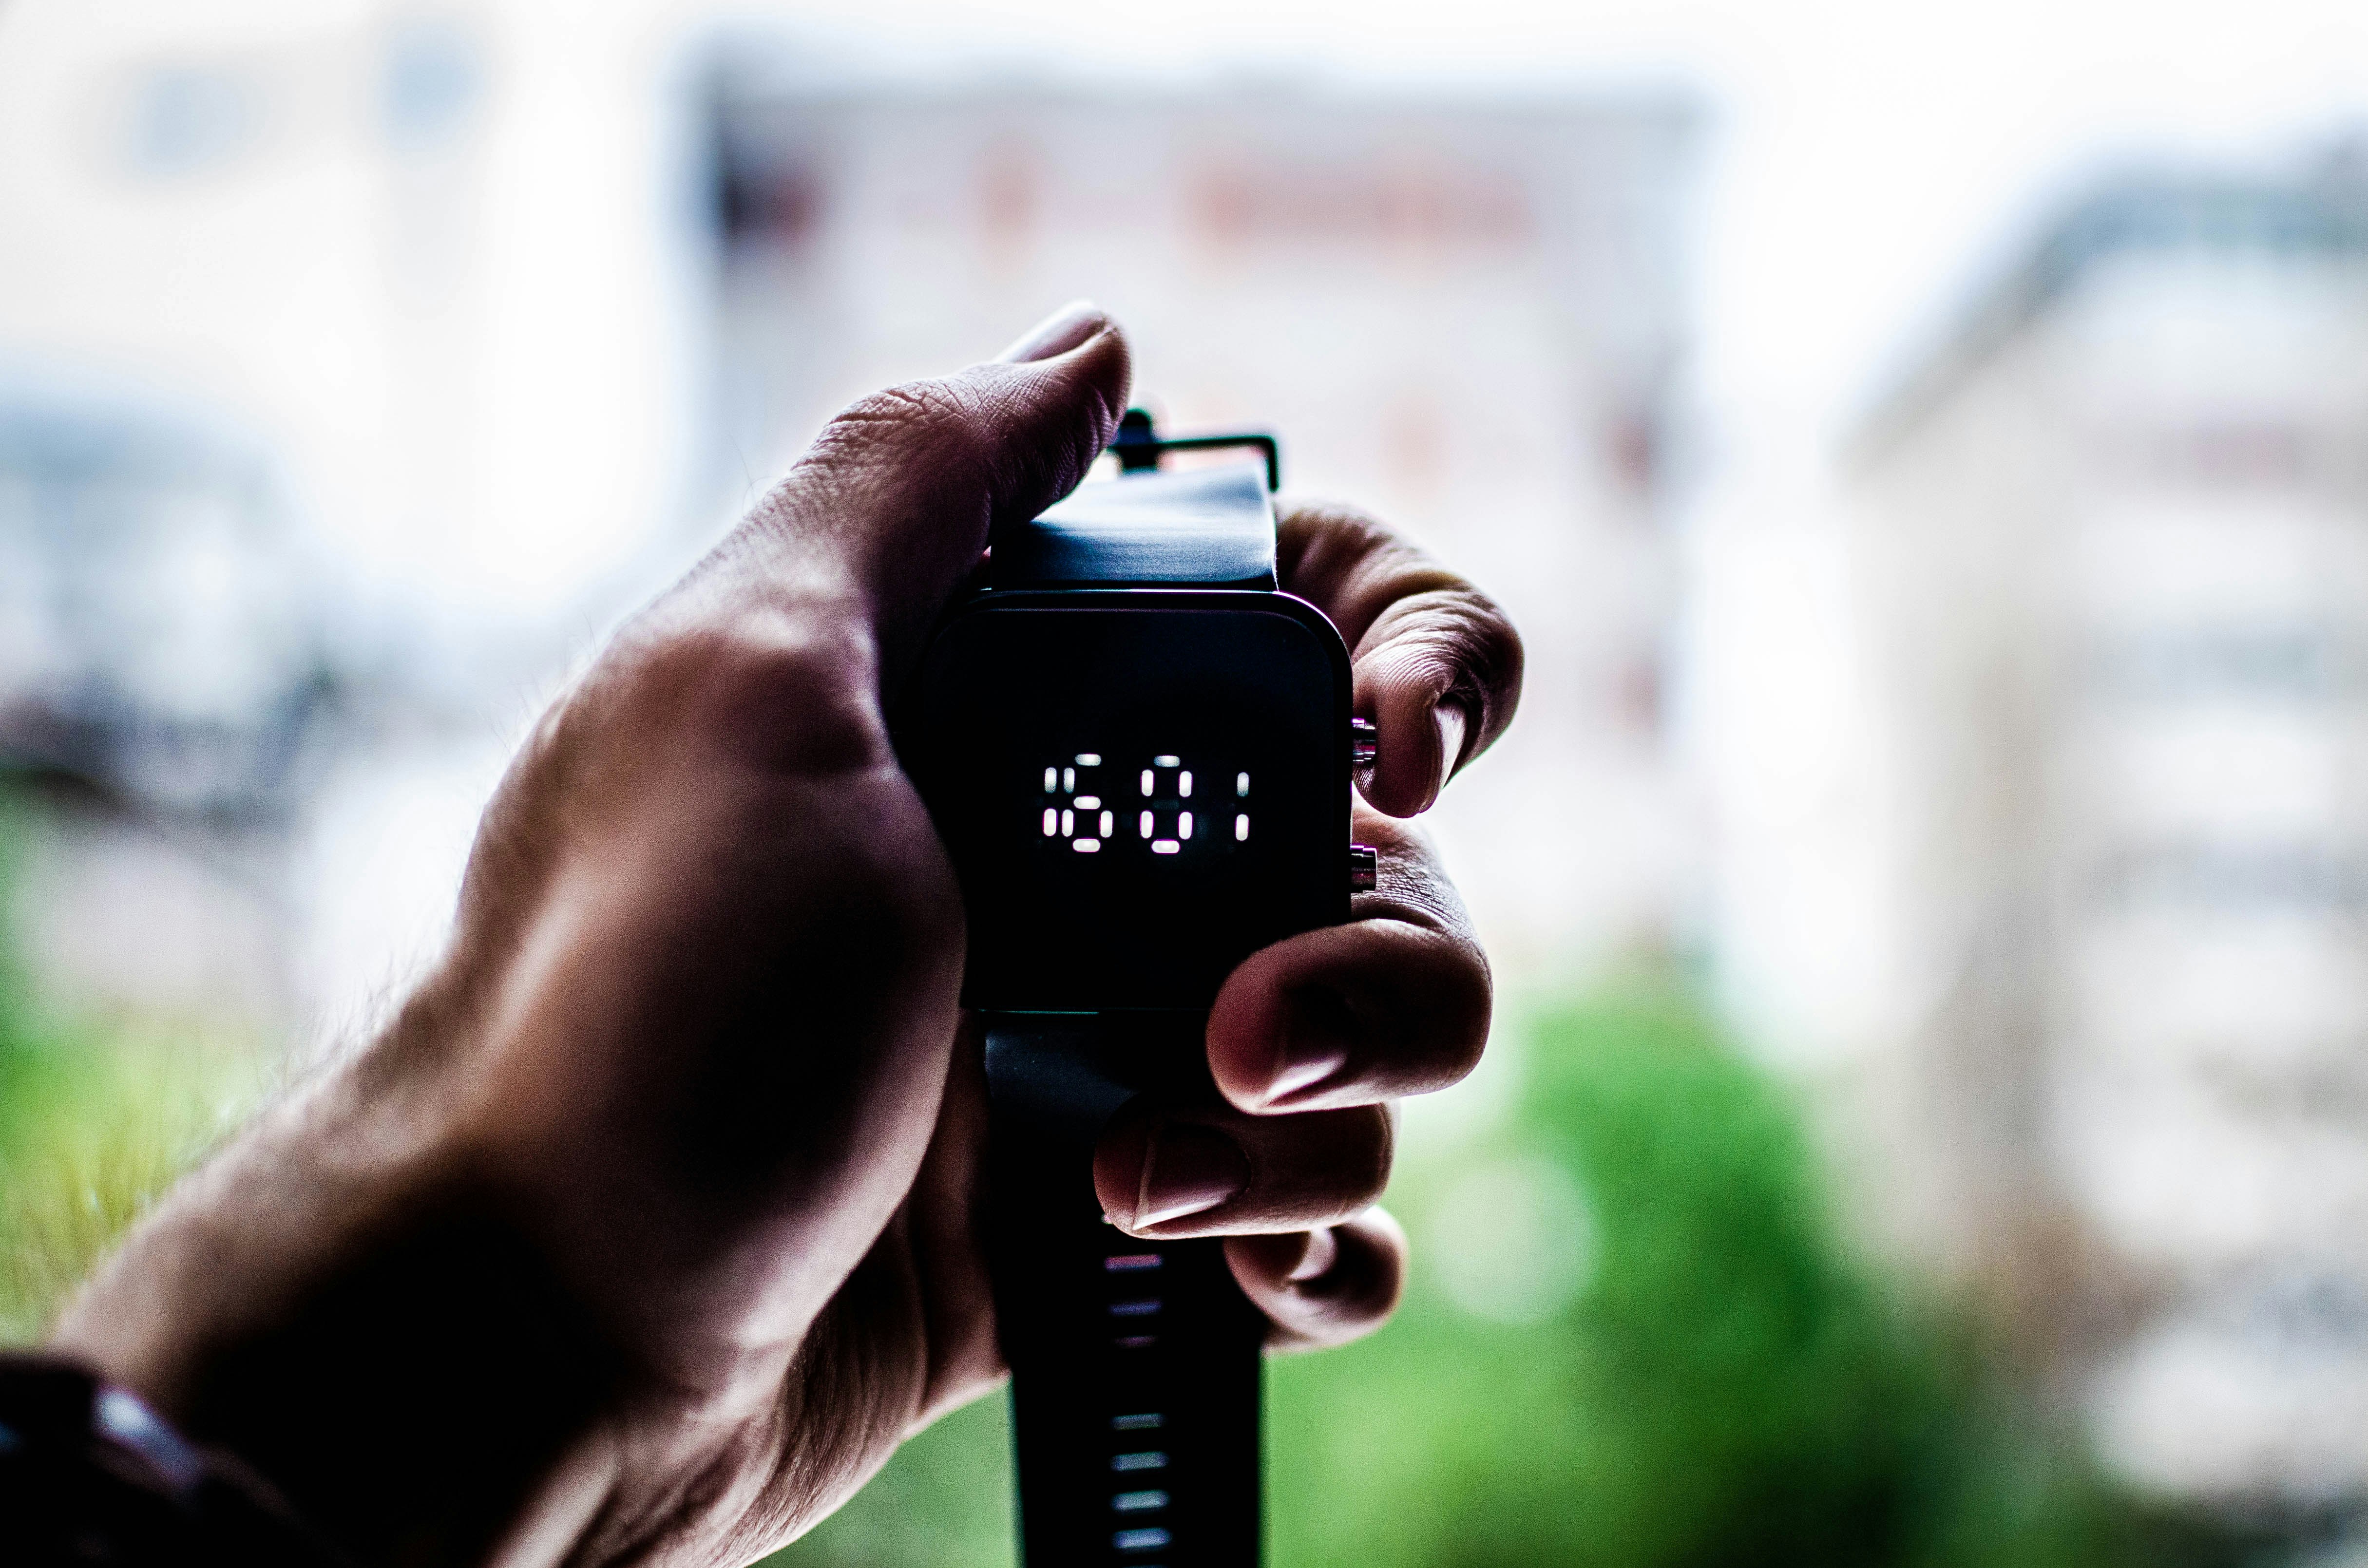 person holding digital watch